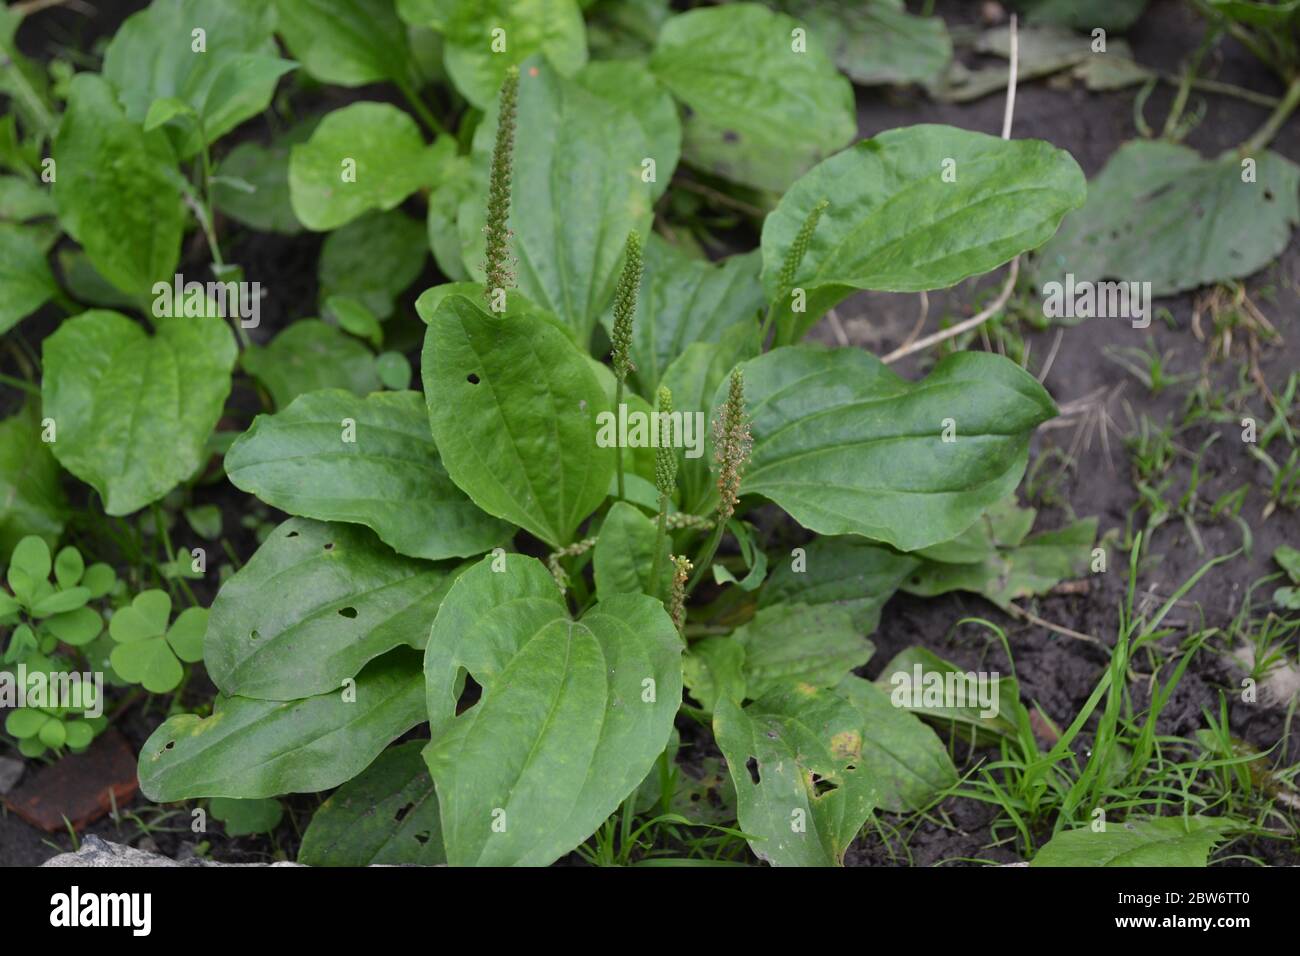 Valuable medicinal plant. Gardening. Green leaves, bushes. Plantain. Plantago Major, a perennial herb of the family Plantagenaceae Stock Photo